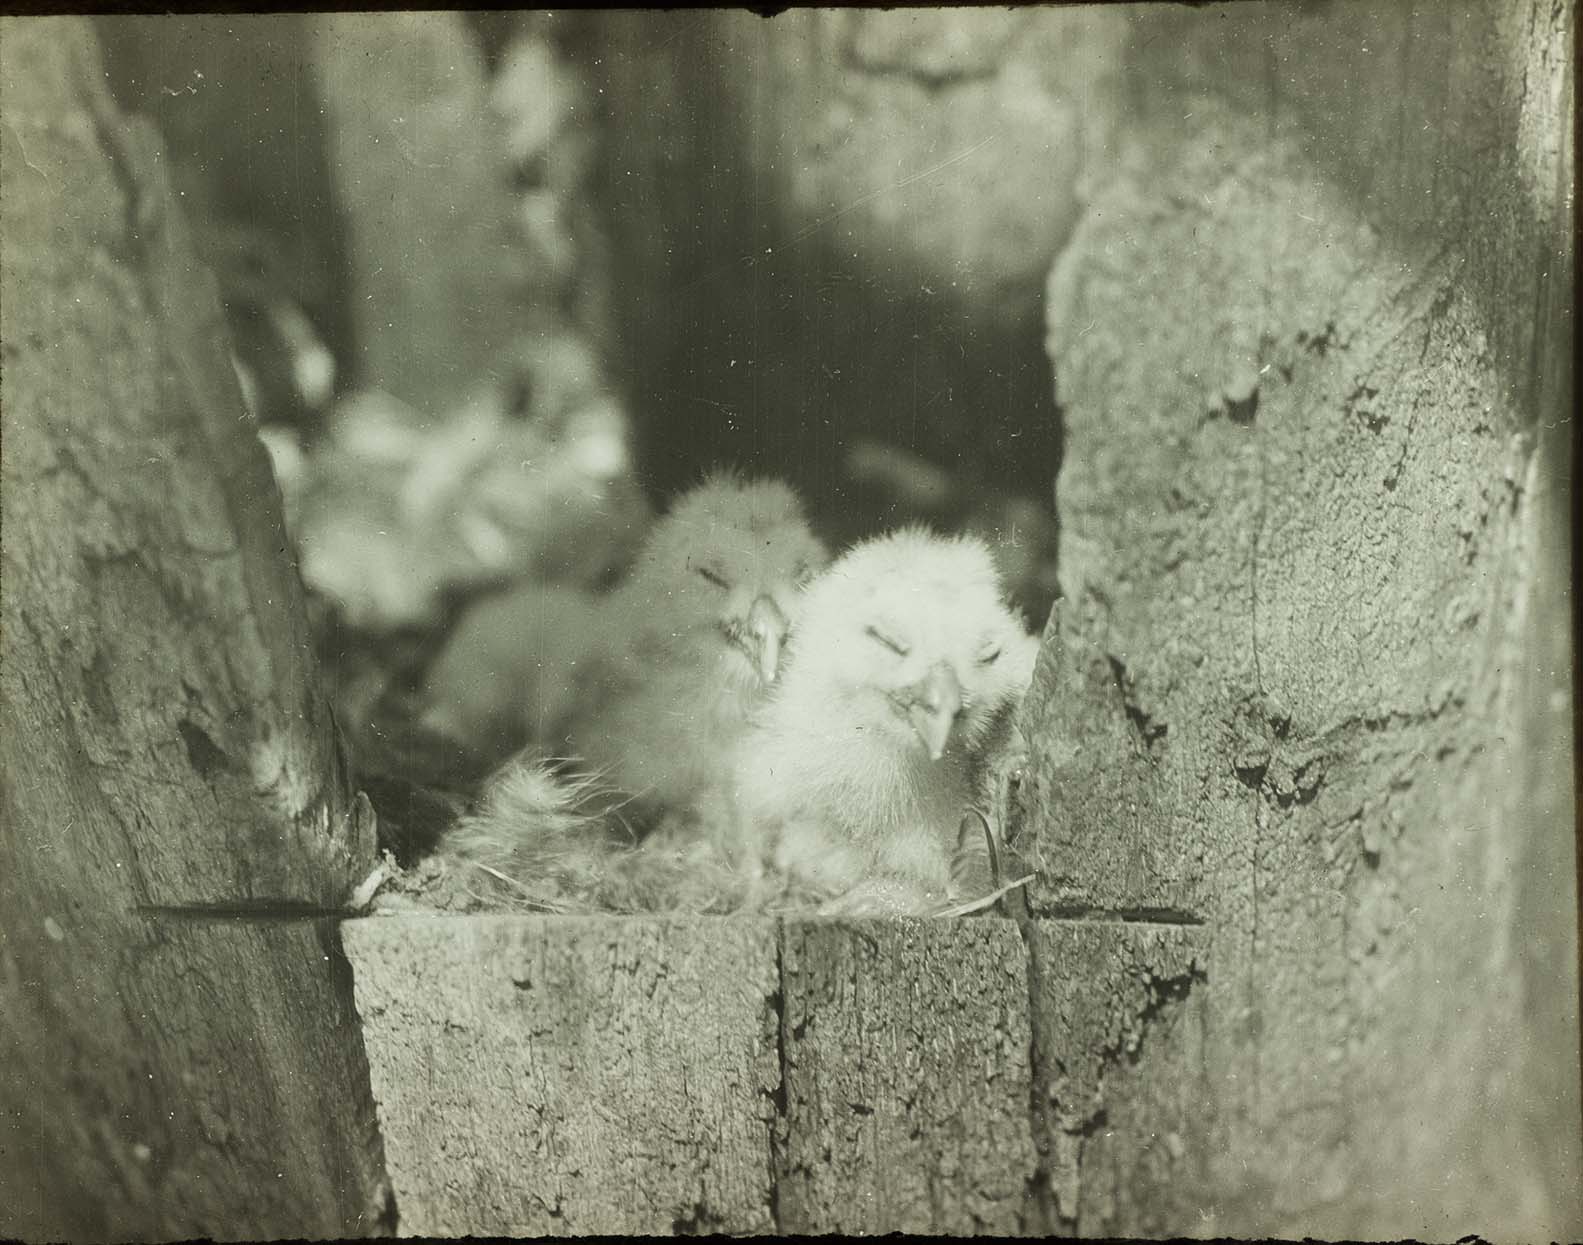 Lantern slide and photograph of two young Barred Owls sleeping